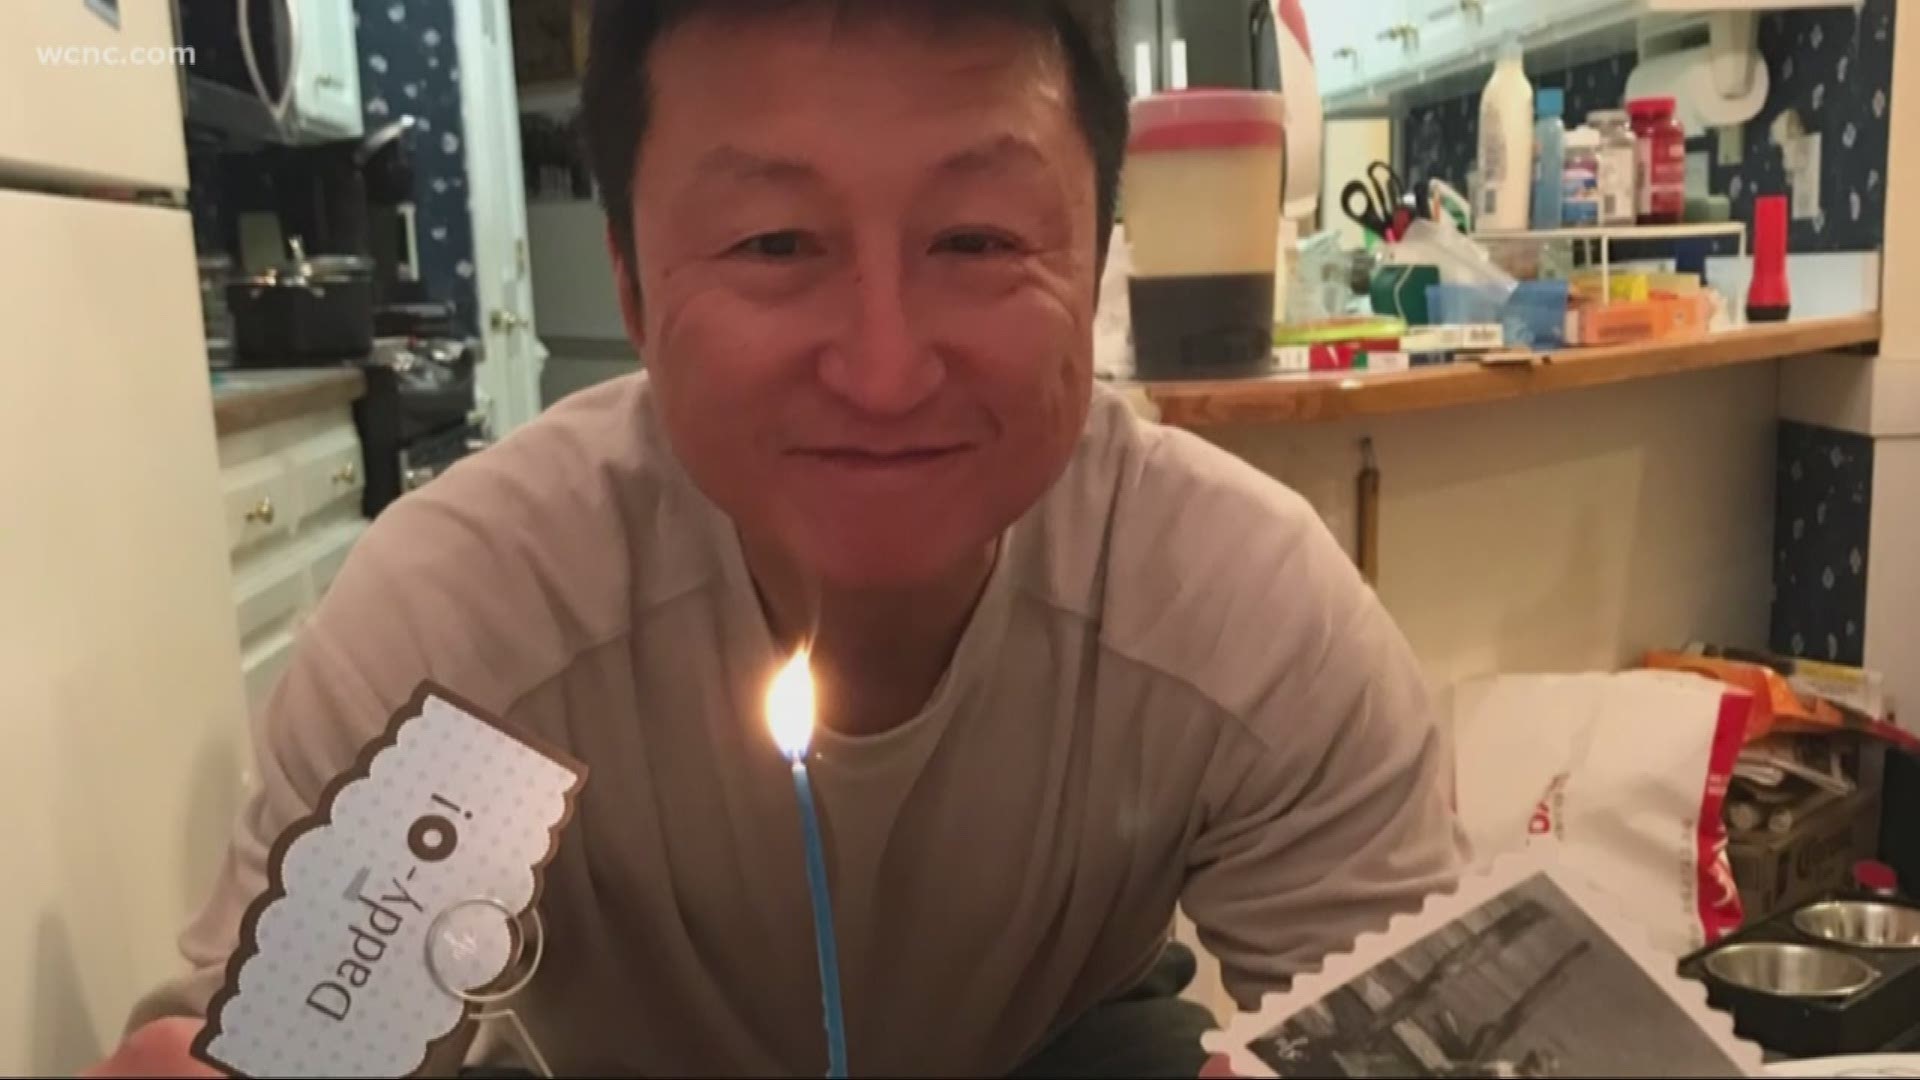 Kong Lee, the owner of a coffee shop, died in the blast. The 61-year old was described by customers and neighbors as hard-working and a mentor.